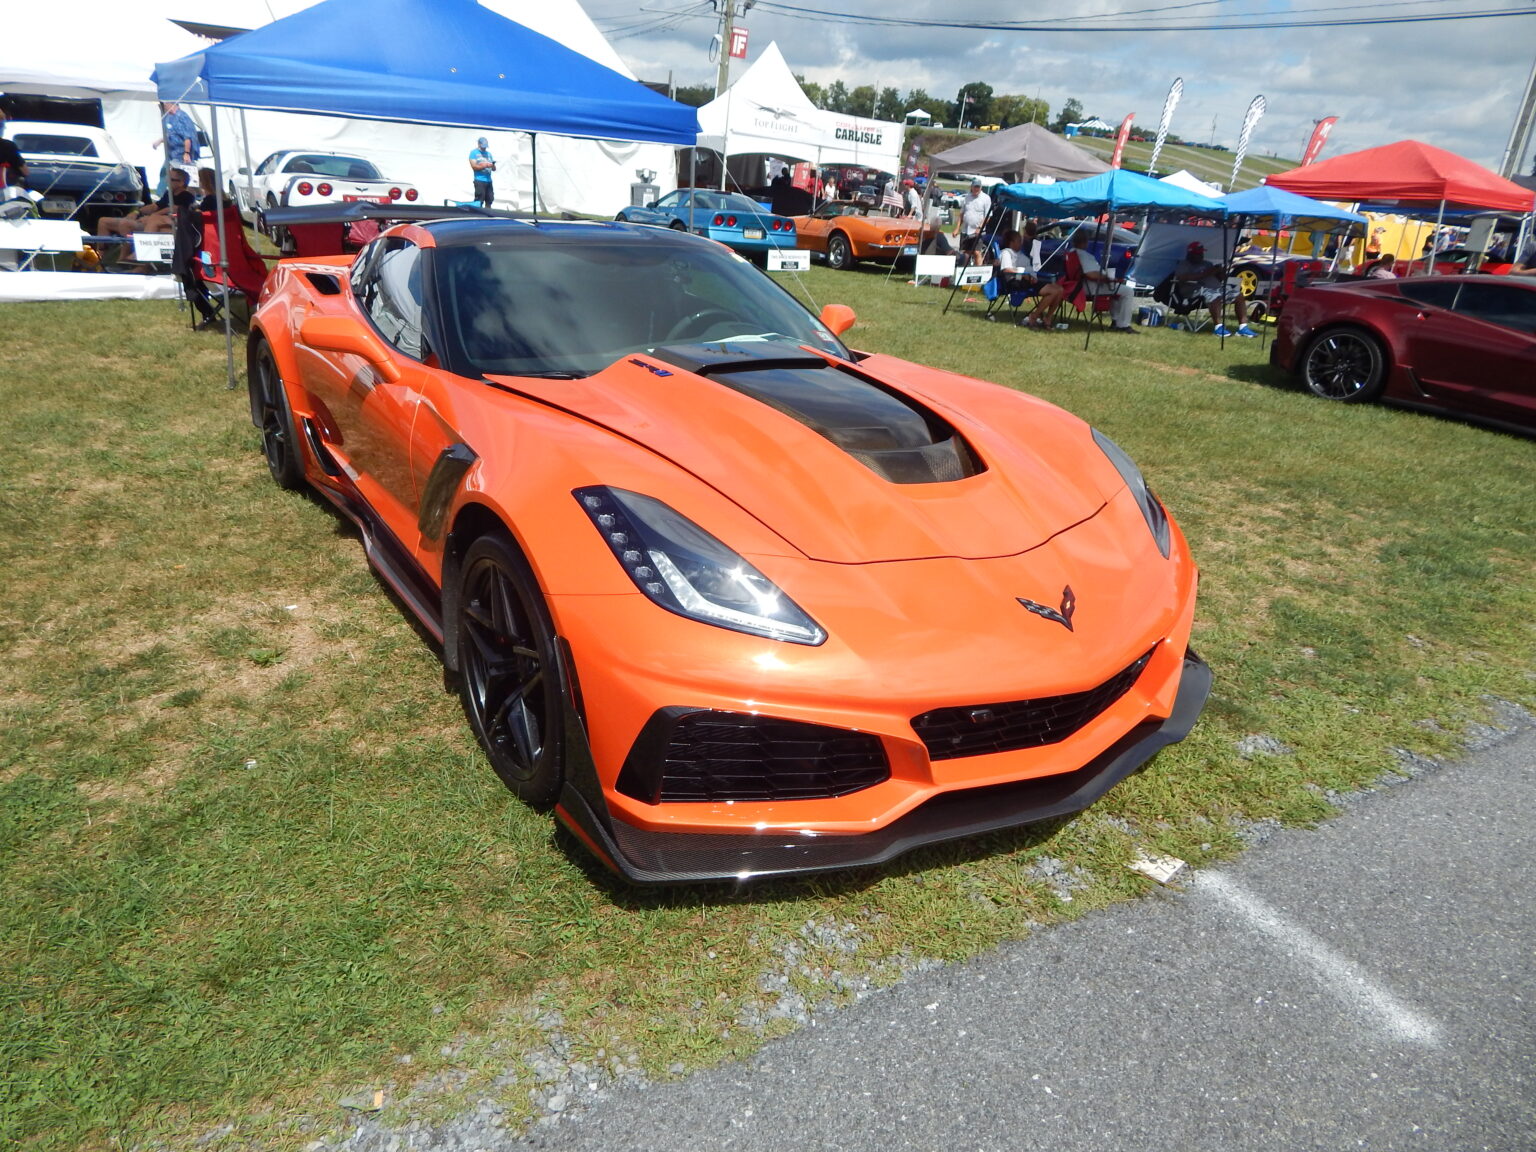 Corvettes at Carlisle 2021 Will Feature Many Different Special